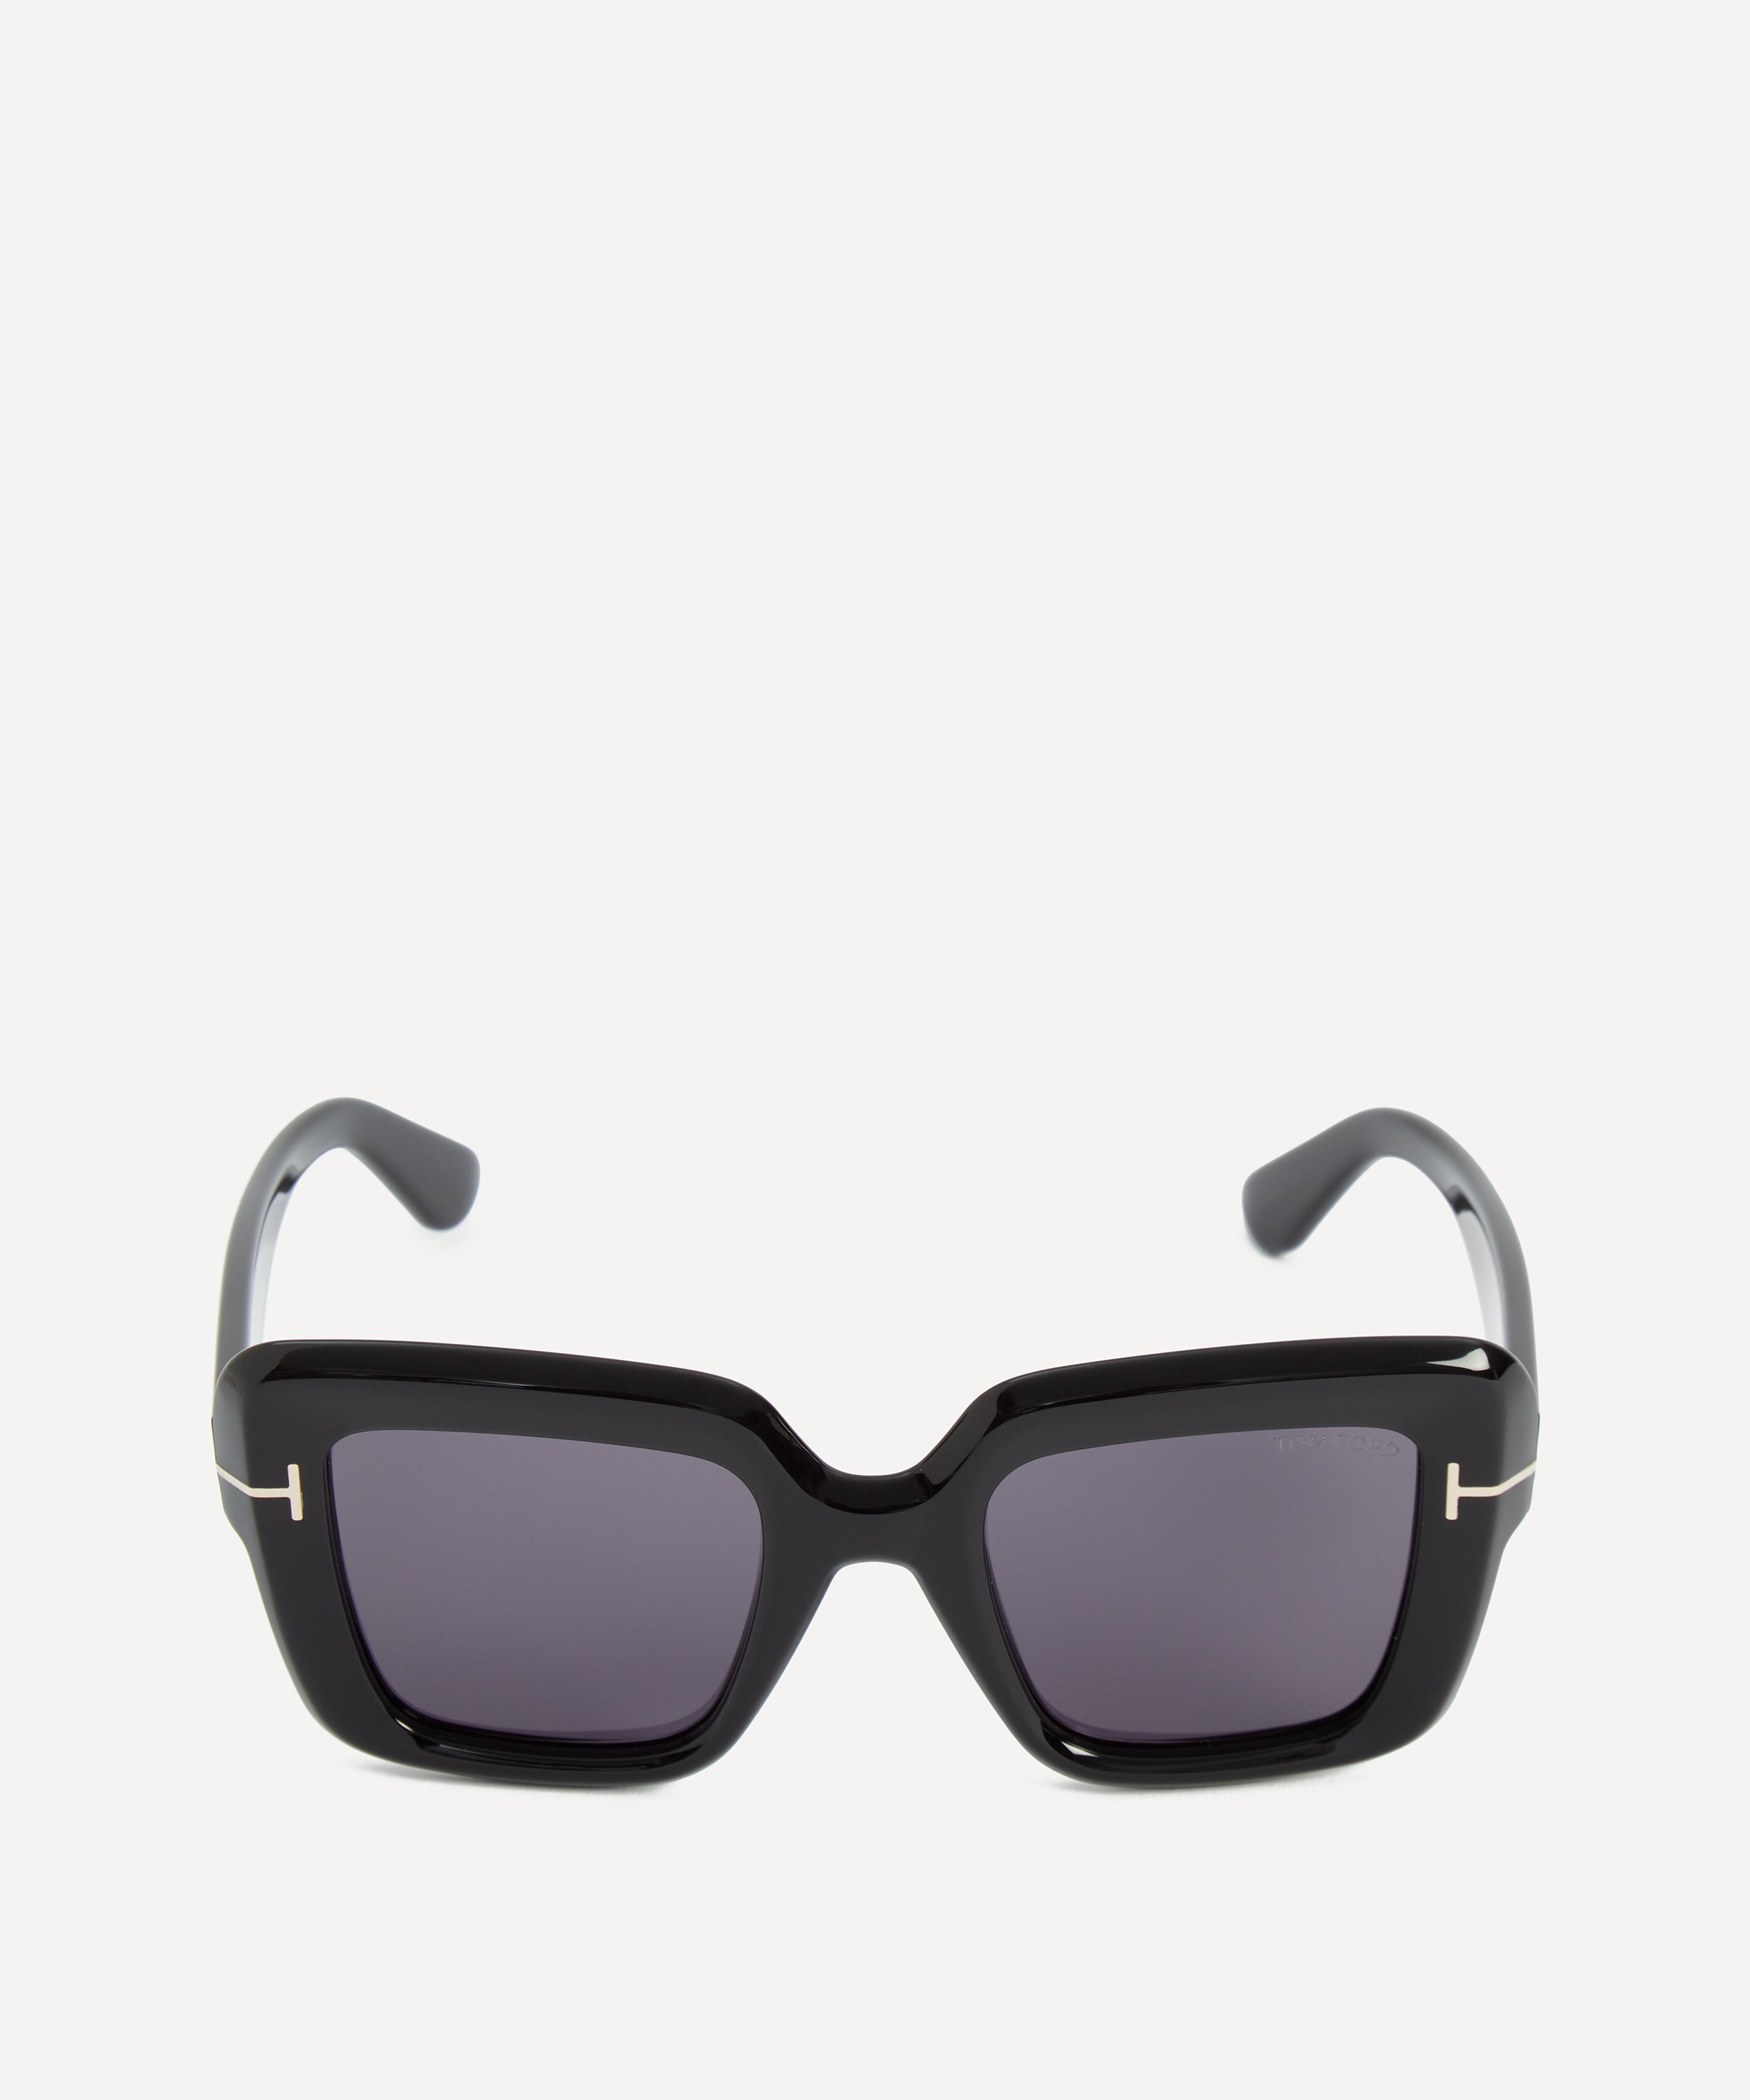 Tom Ford - Fausto Square Sunglasses image number 0